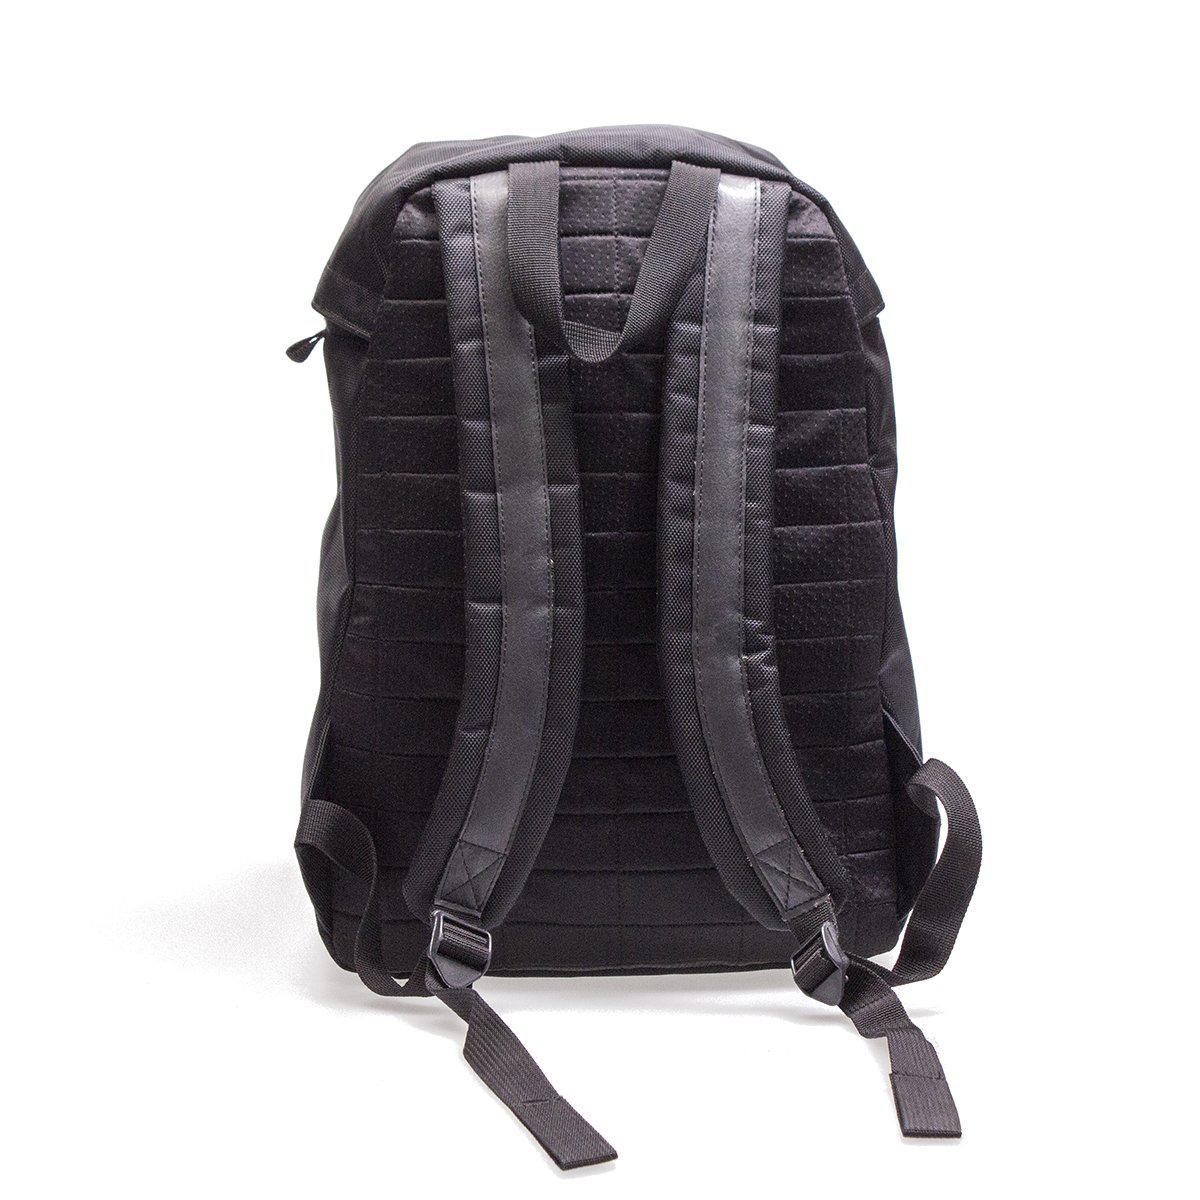 smell proof backpack